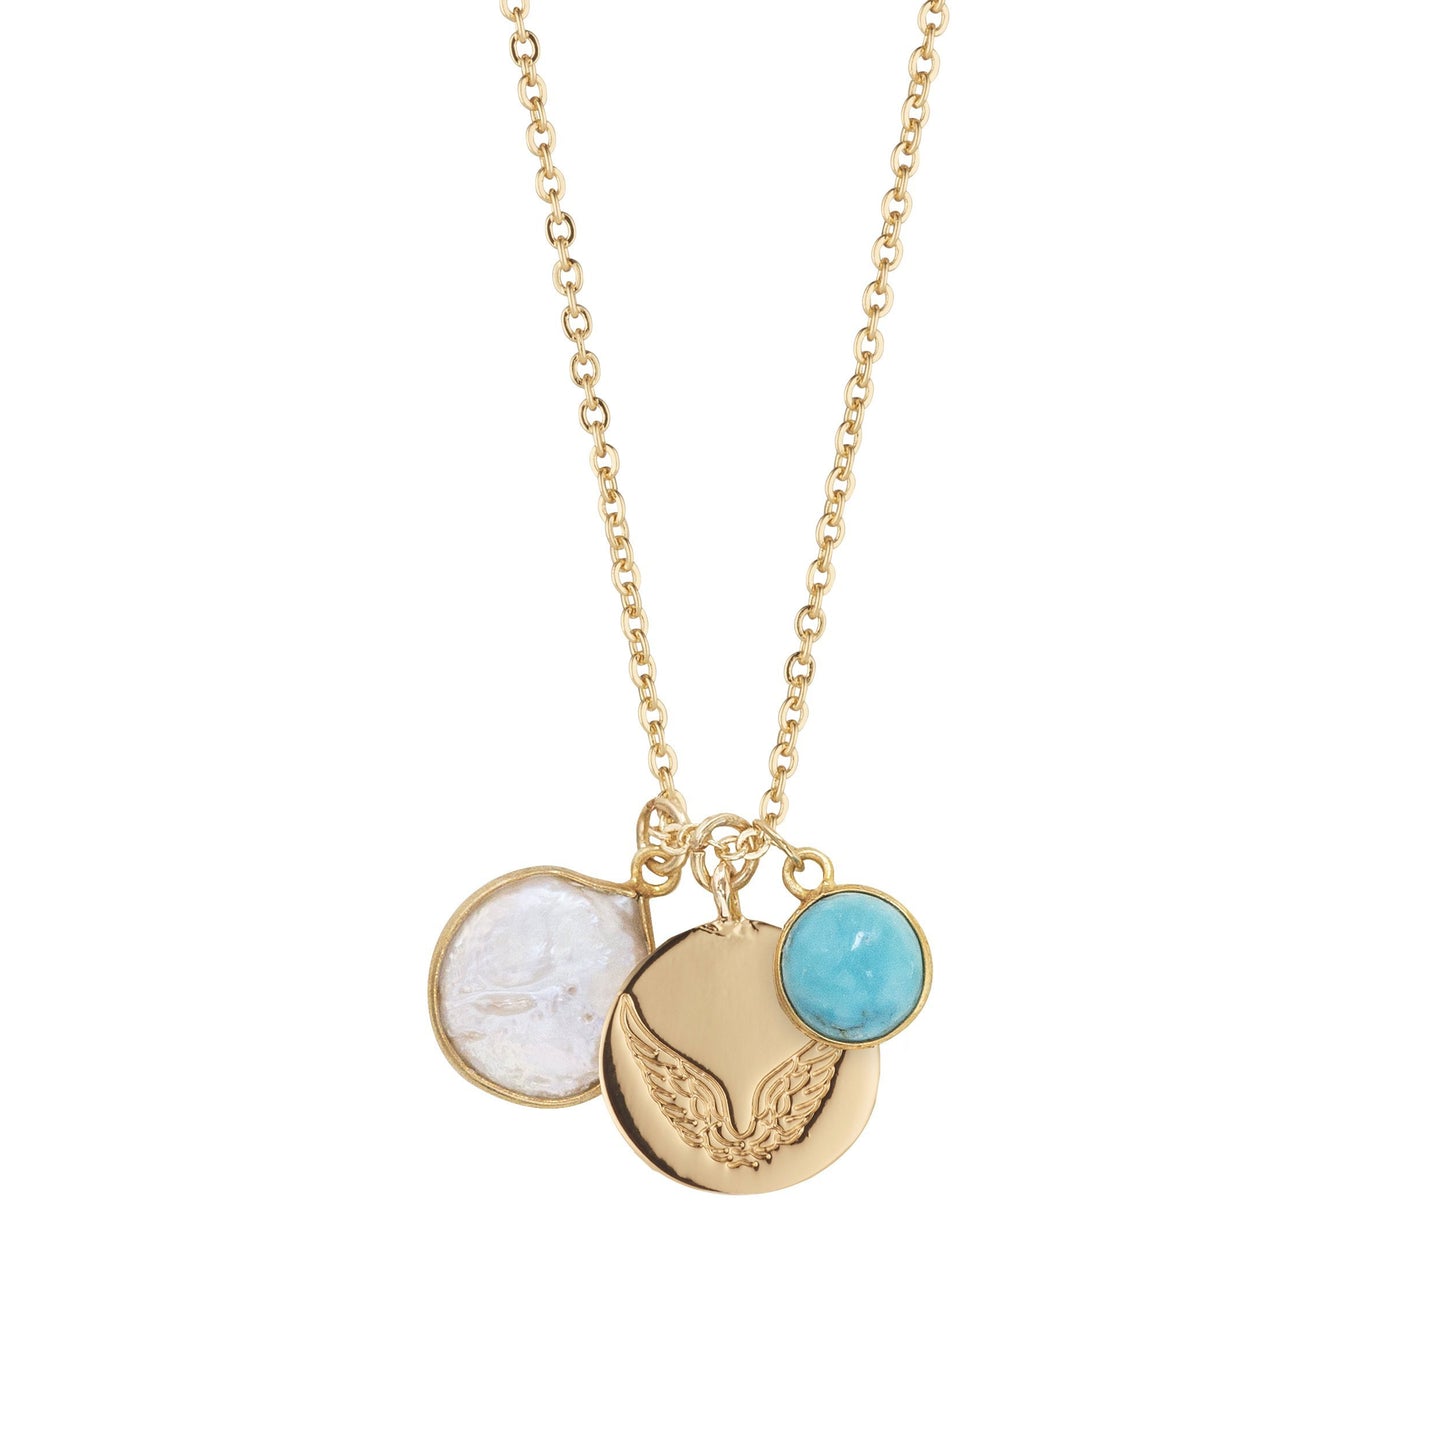 Pearl & Turquoise Necklace With Disc Charm for Peacefulness